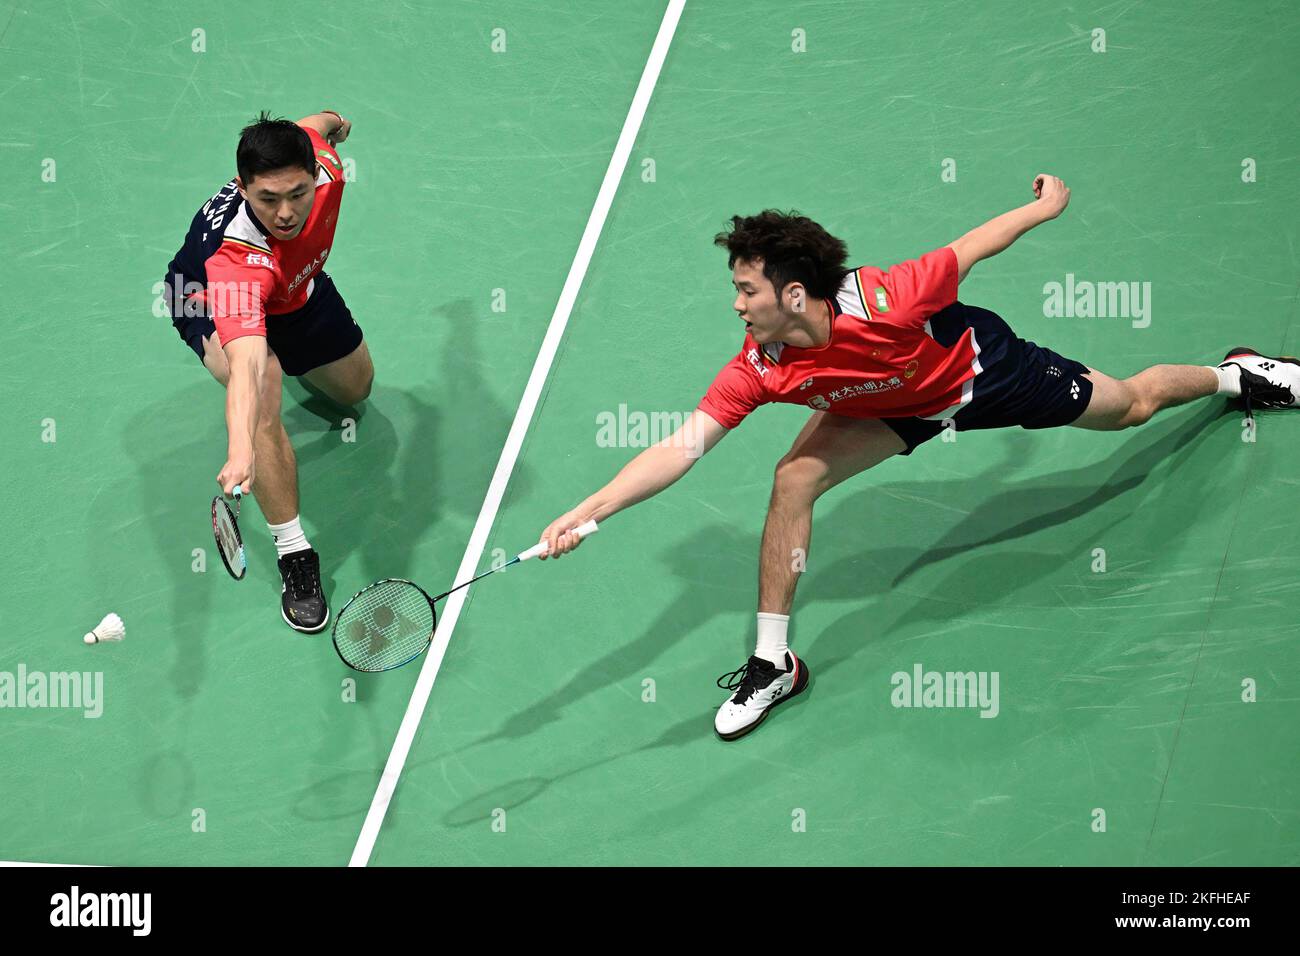 Sydney, Australia. 18th Nov, 2022. Zhou Hao Dong (L) and He Ji Ting (R) of China seen during the 2022 SATHIO GROUP Australian Badminton Open men's double quarter finals match against Liang Wei Keng and Wang Chang of China. Zhou and He won the match 21-19, 16-21, 21-17. Credit: SOPA Images Limited/Alamy Live News Stock Photo